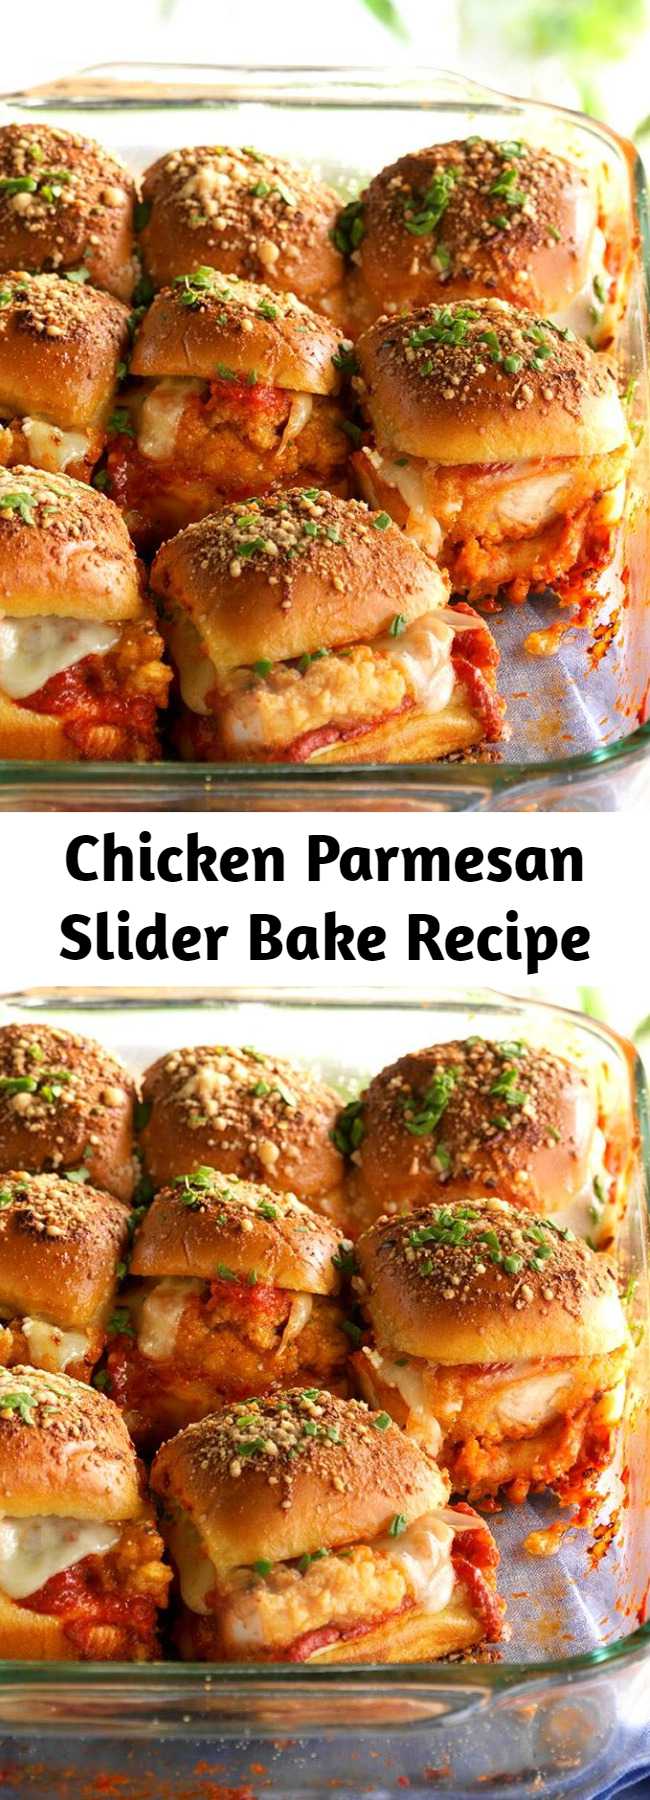 Chicken Parmesan Slider Bake Recipe - Sliders are the perfect finger food for any get-together, and this flavorful chicken Parmesan version won’t disappoint.